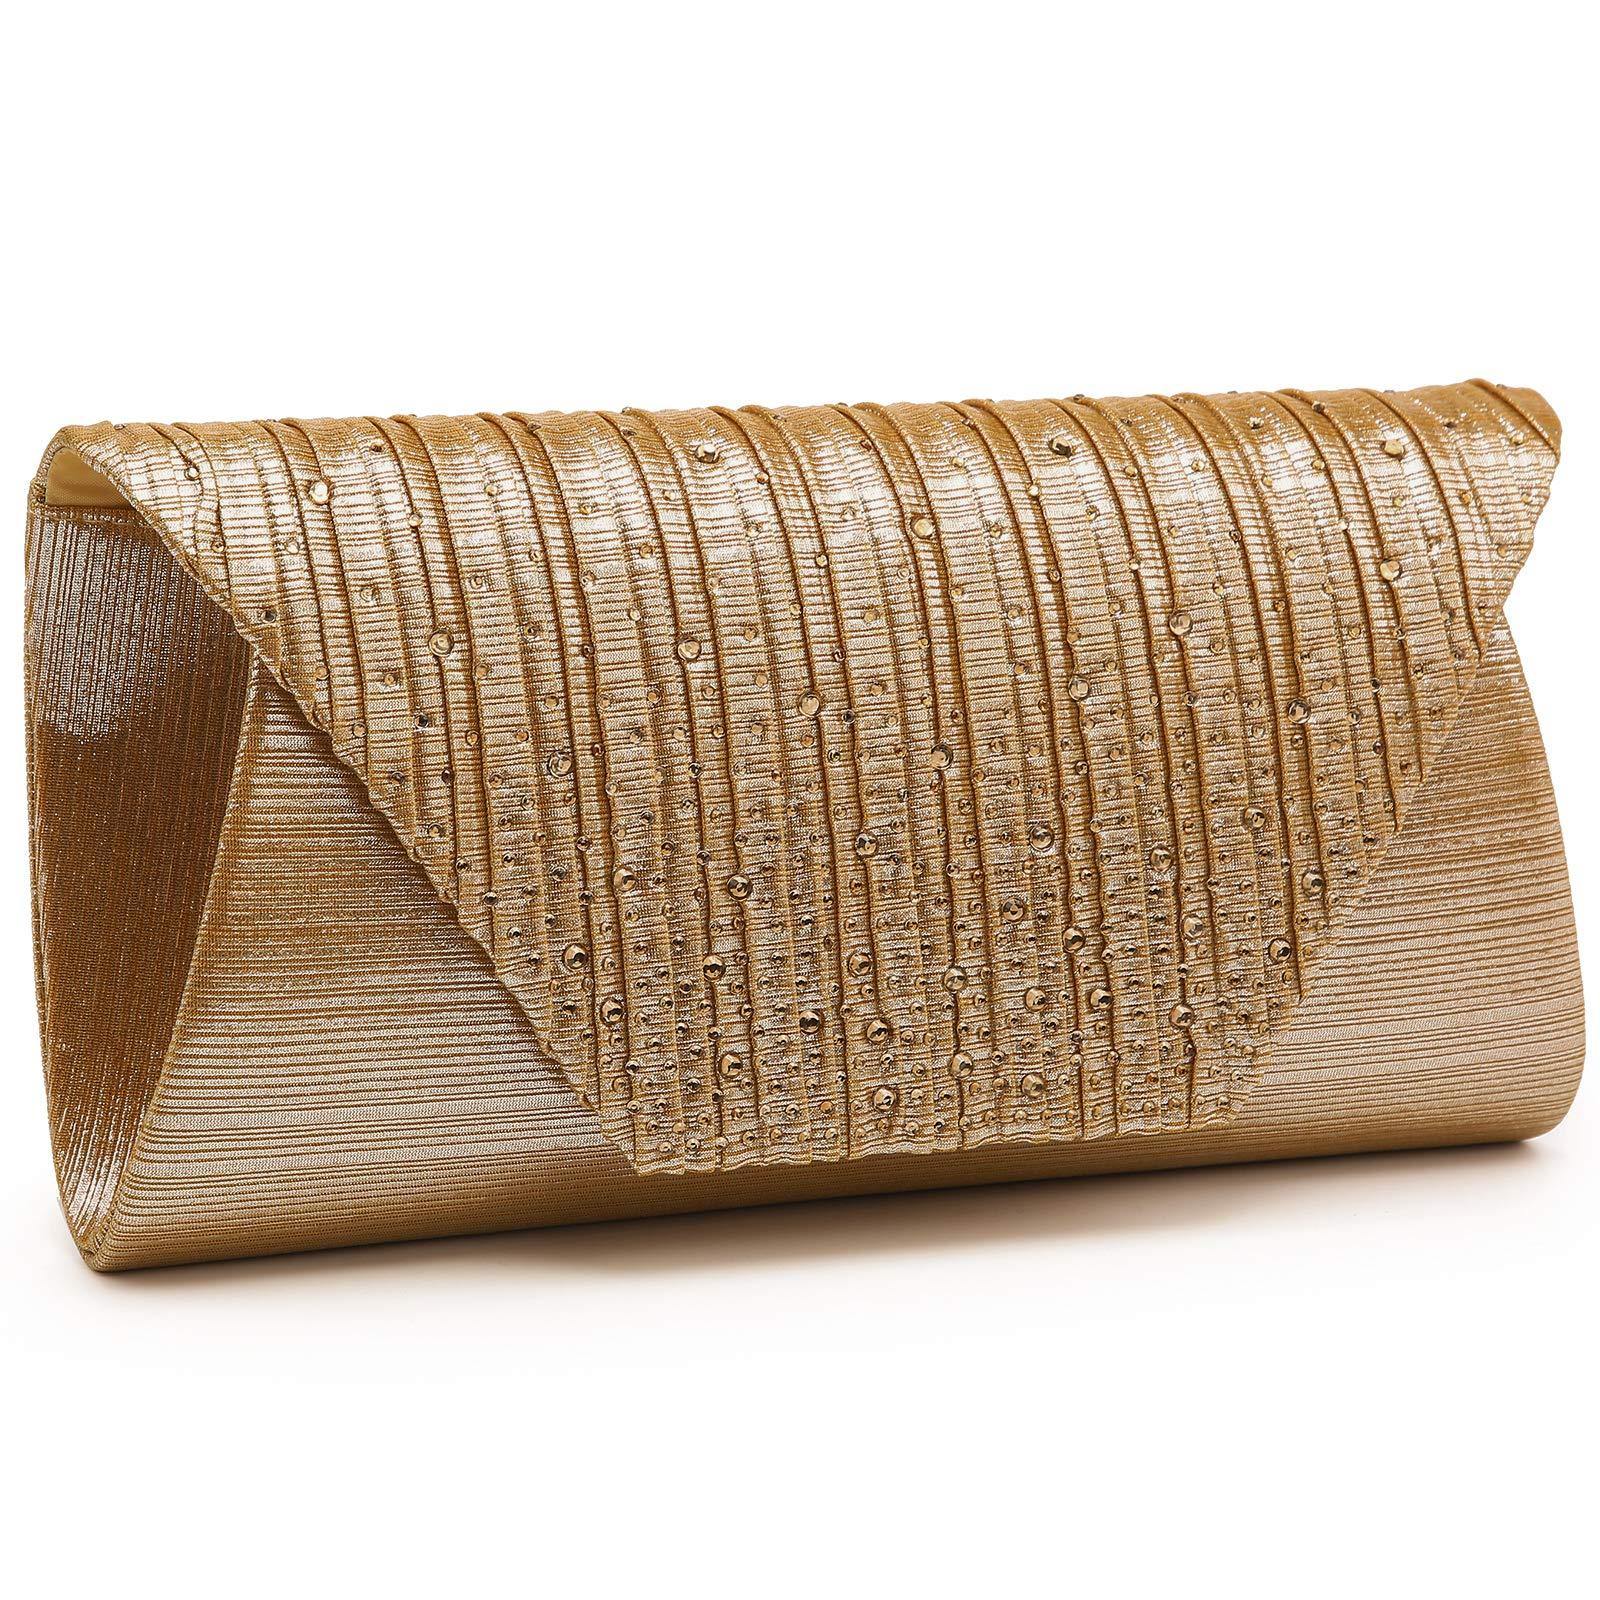 The Envelope Clutch You Need for Every Occasion - Hanzastephens